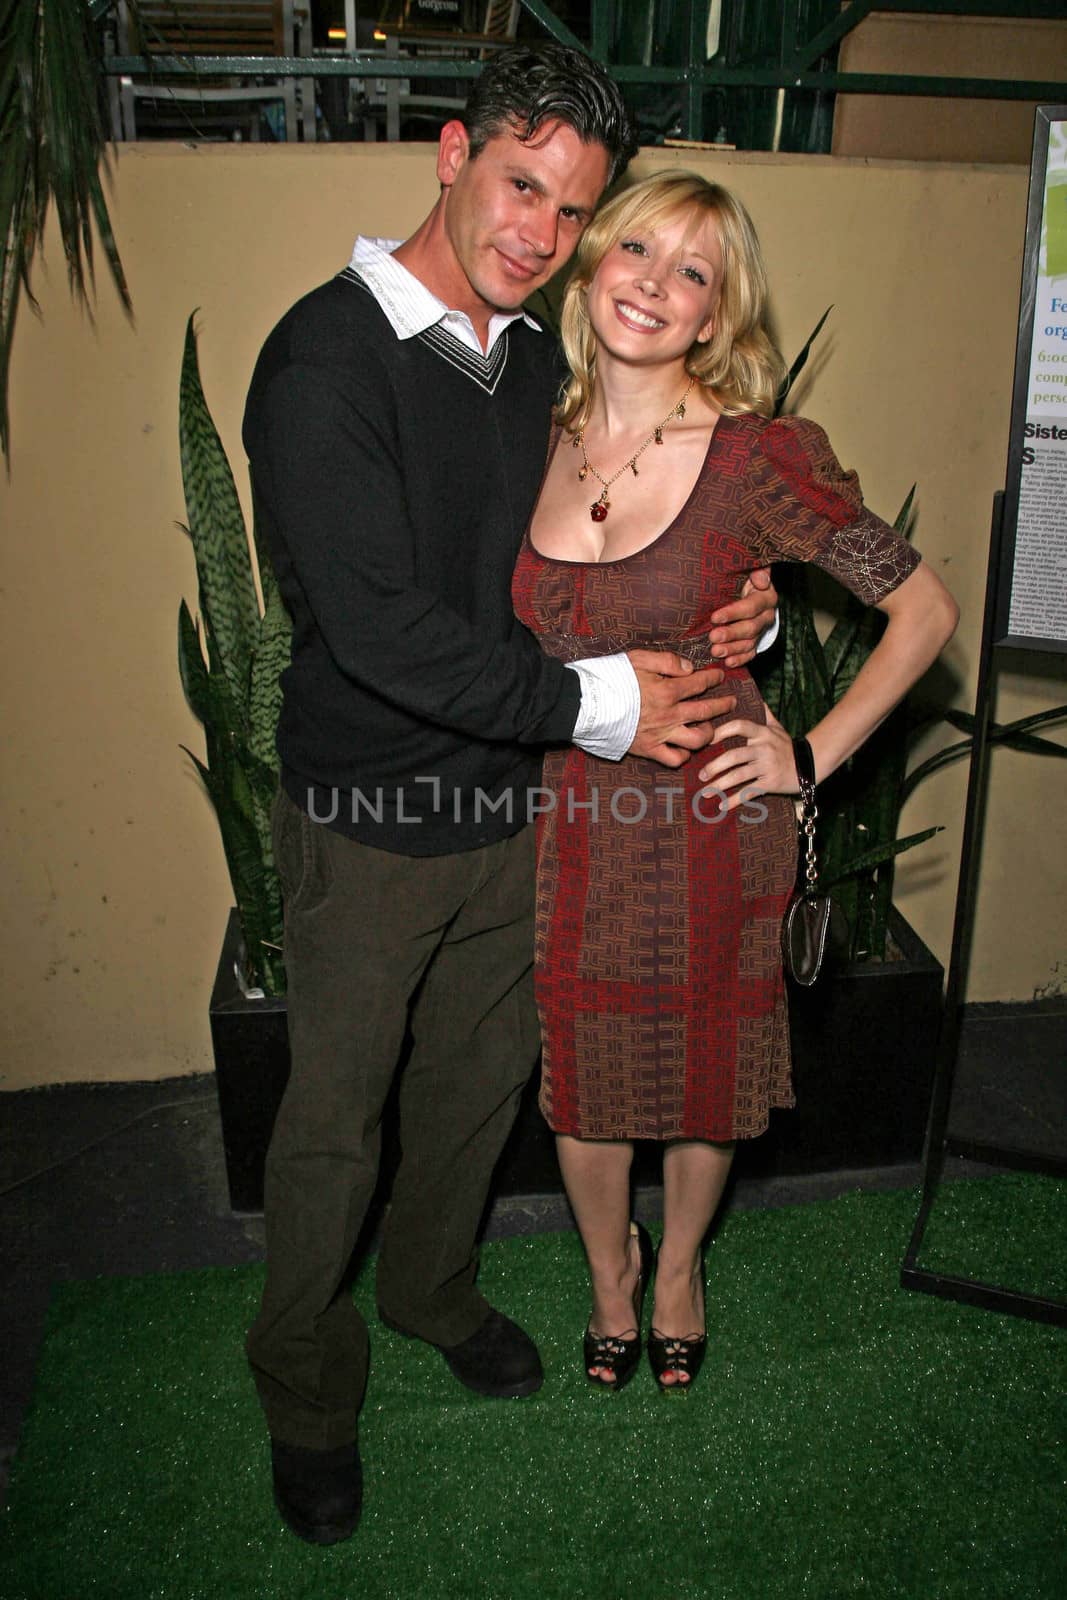 Courtney Peldon and boyfriend at the Launch party for "Starring...!" Fragrances and "Charmed" Jewelry, benefitting Tree People. Whole Foods Lifestyle Store, Los Angeles, CA. 04-21-08